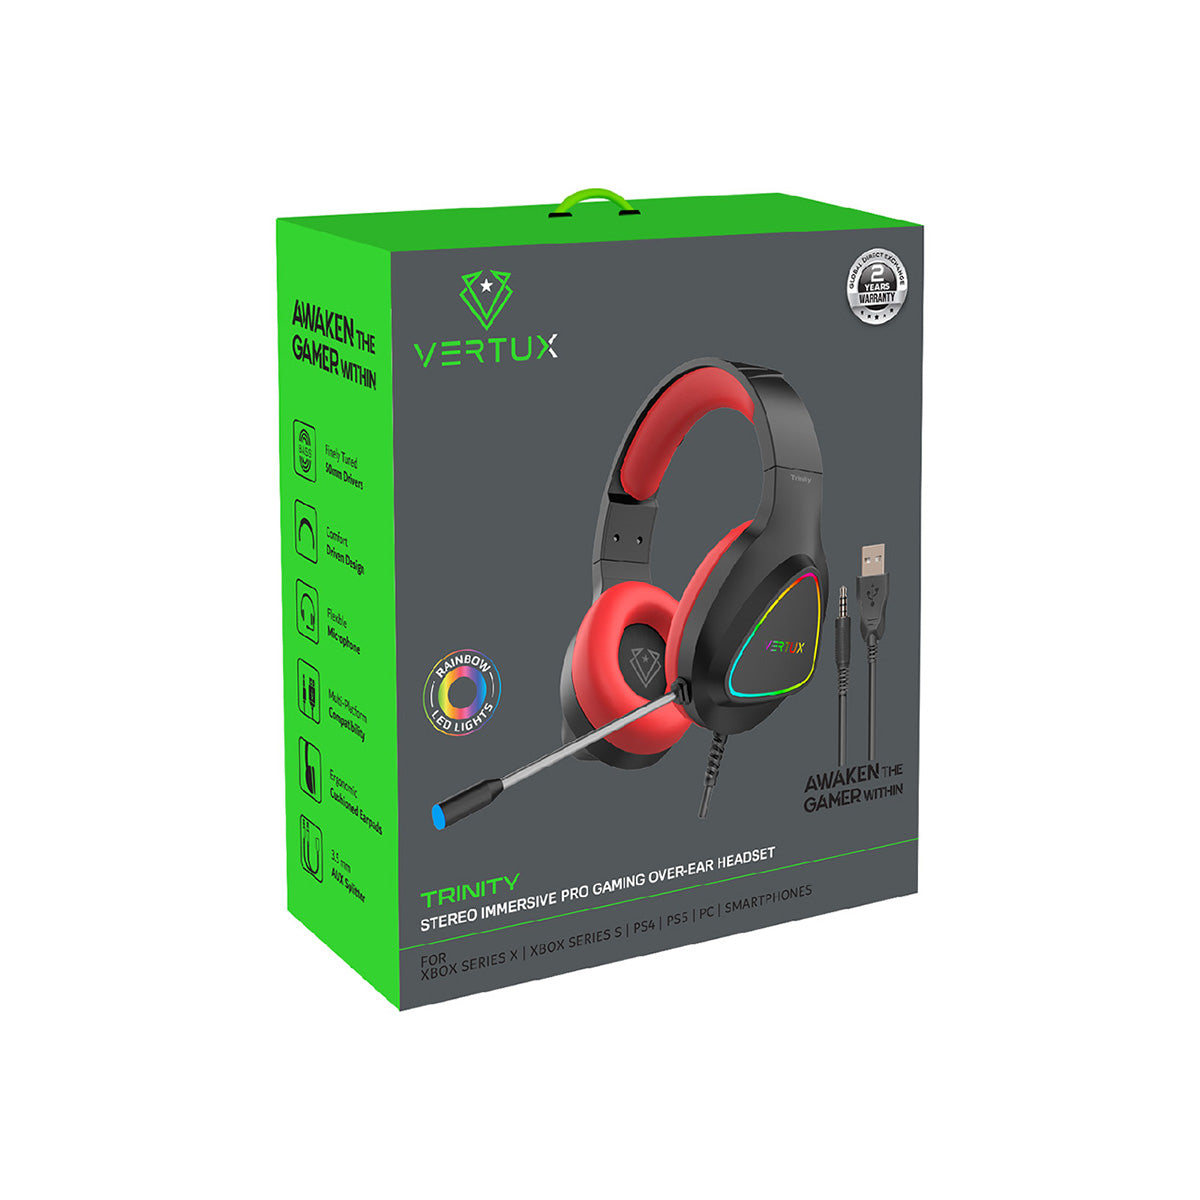 Stereo Immersive Pro Gaming Over-Ear Headset